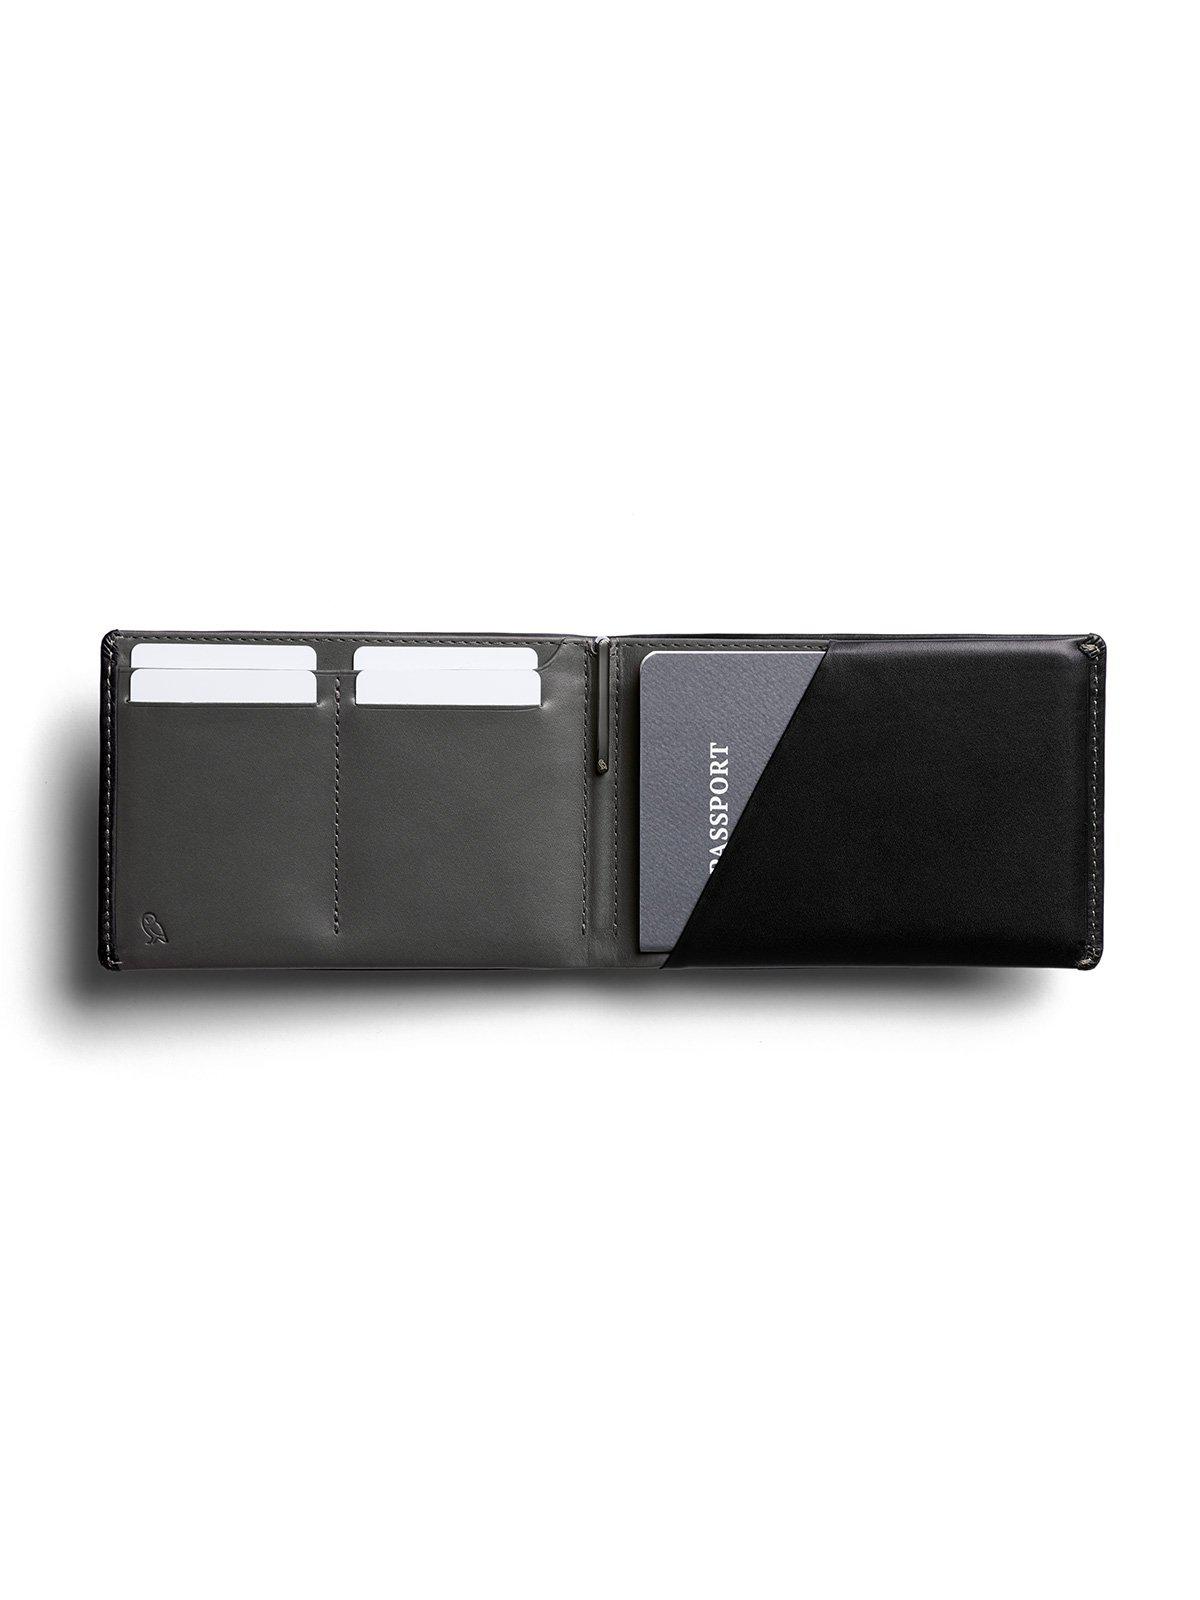 Bellroy Travel Wallet Black RFID - MORE by Morello Indonesia